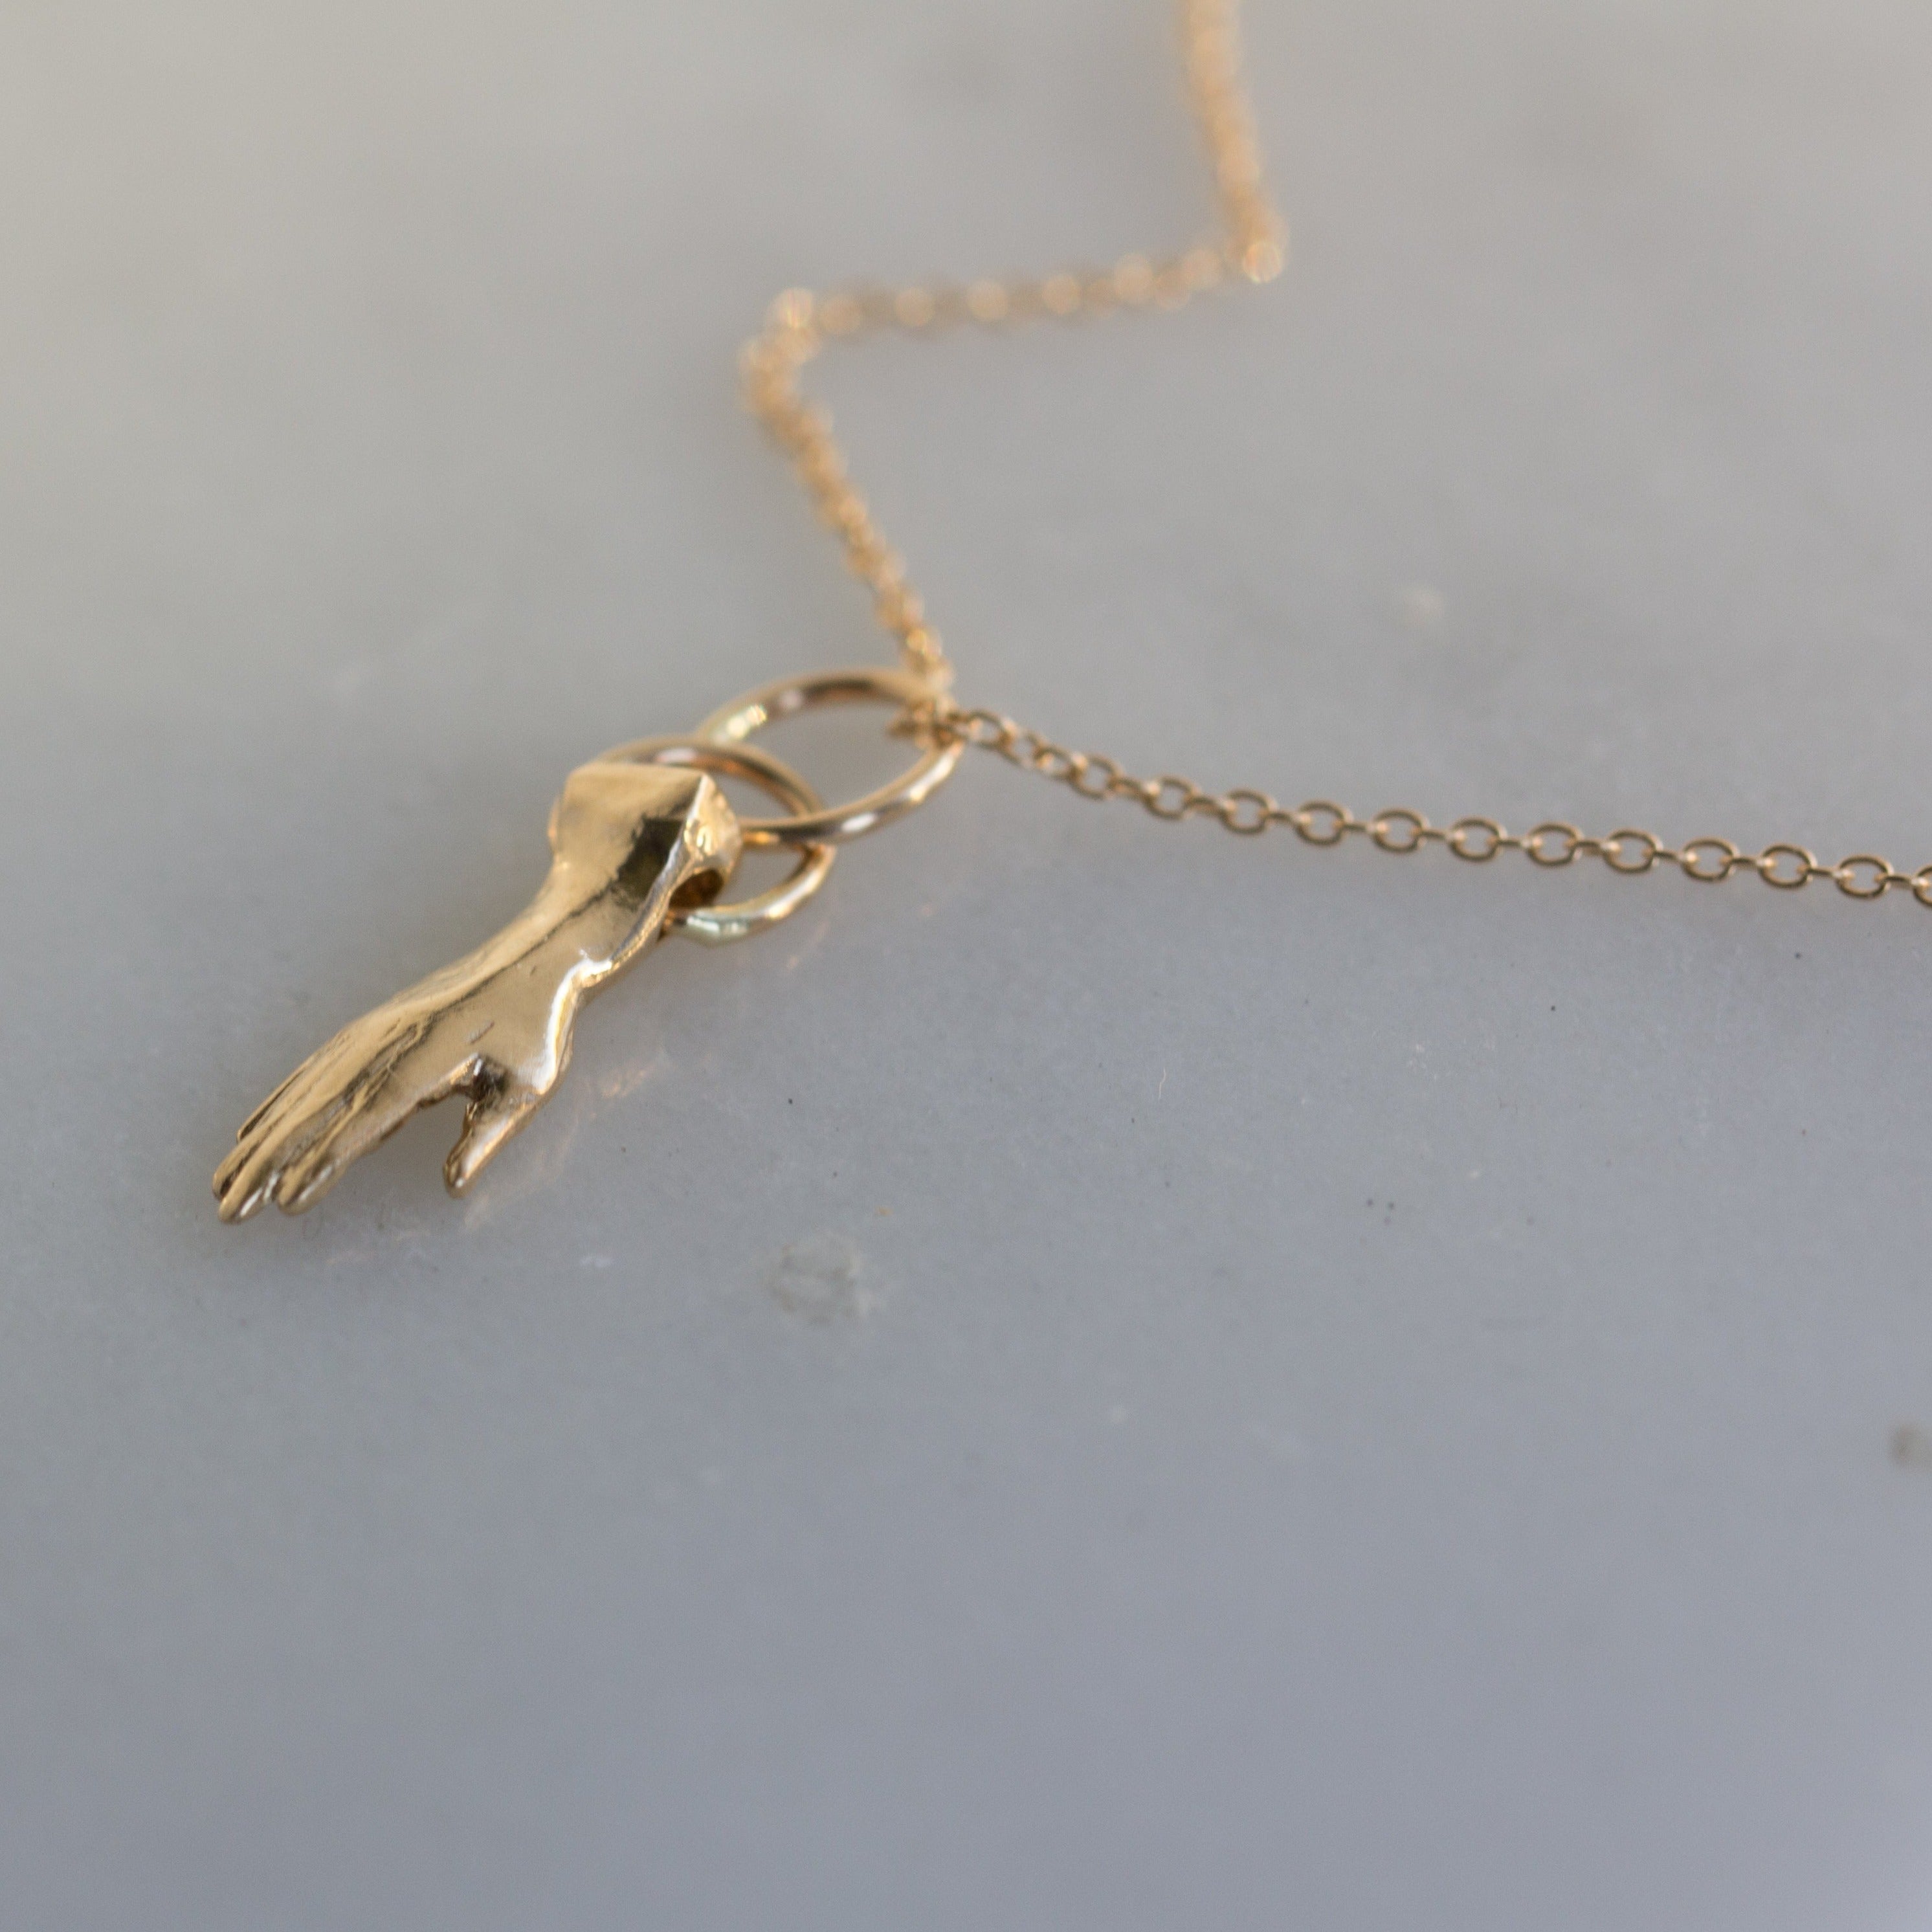 12th house jewelry, solid 14k gold necklace, ceremonial and celestial jewelry, less carbon footprint, handmade in NYC, kelly star lannen, open hand necklace, dainty necklace, holiday gift ideas for her